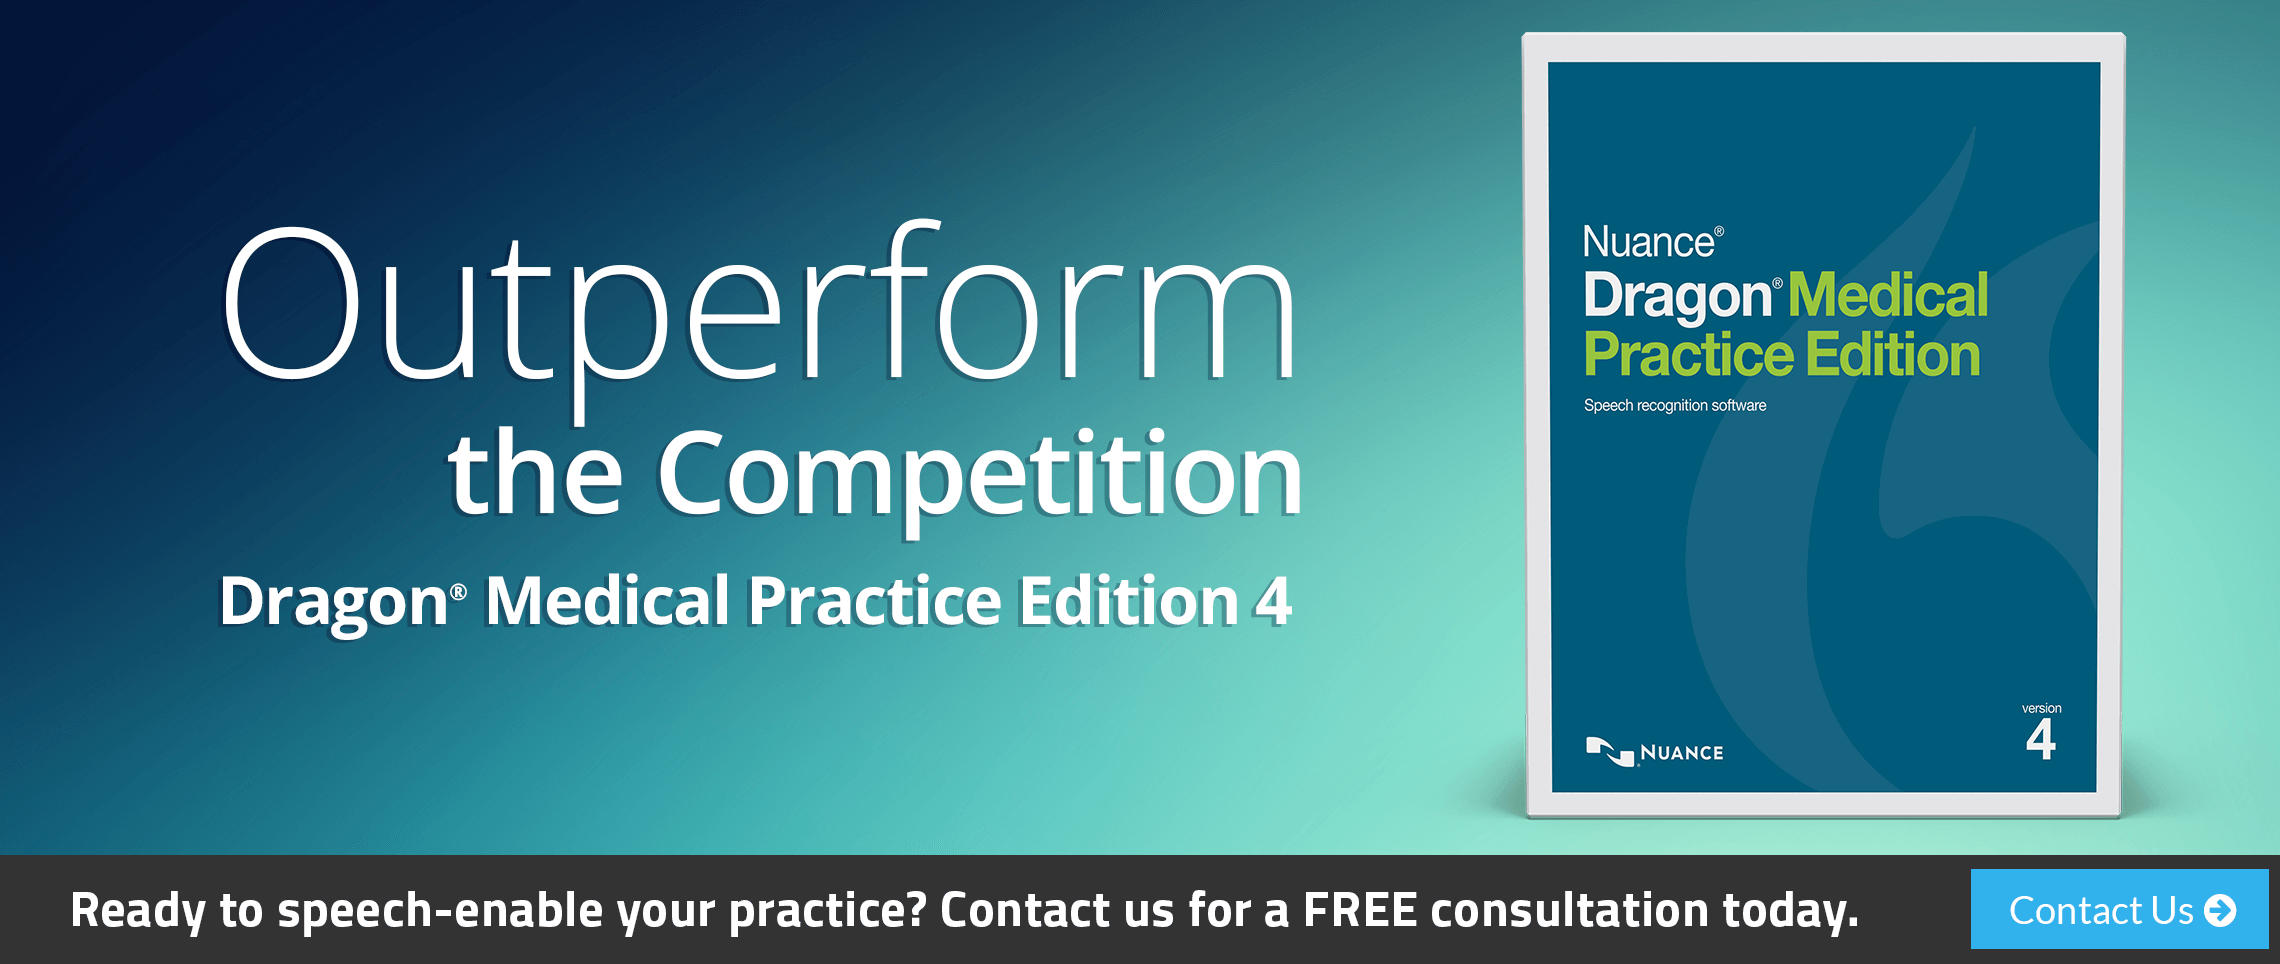 Outperform the competition - Dragon Medical Practice Edition 4